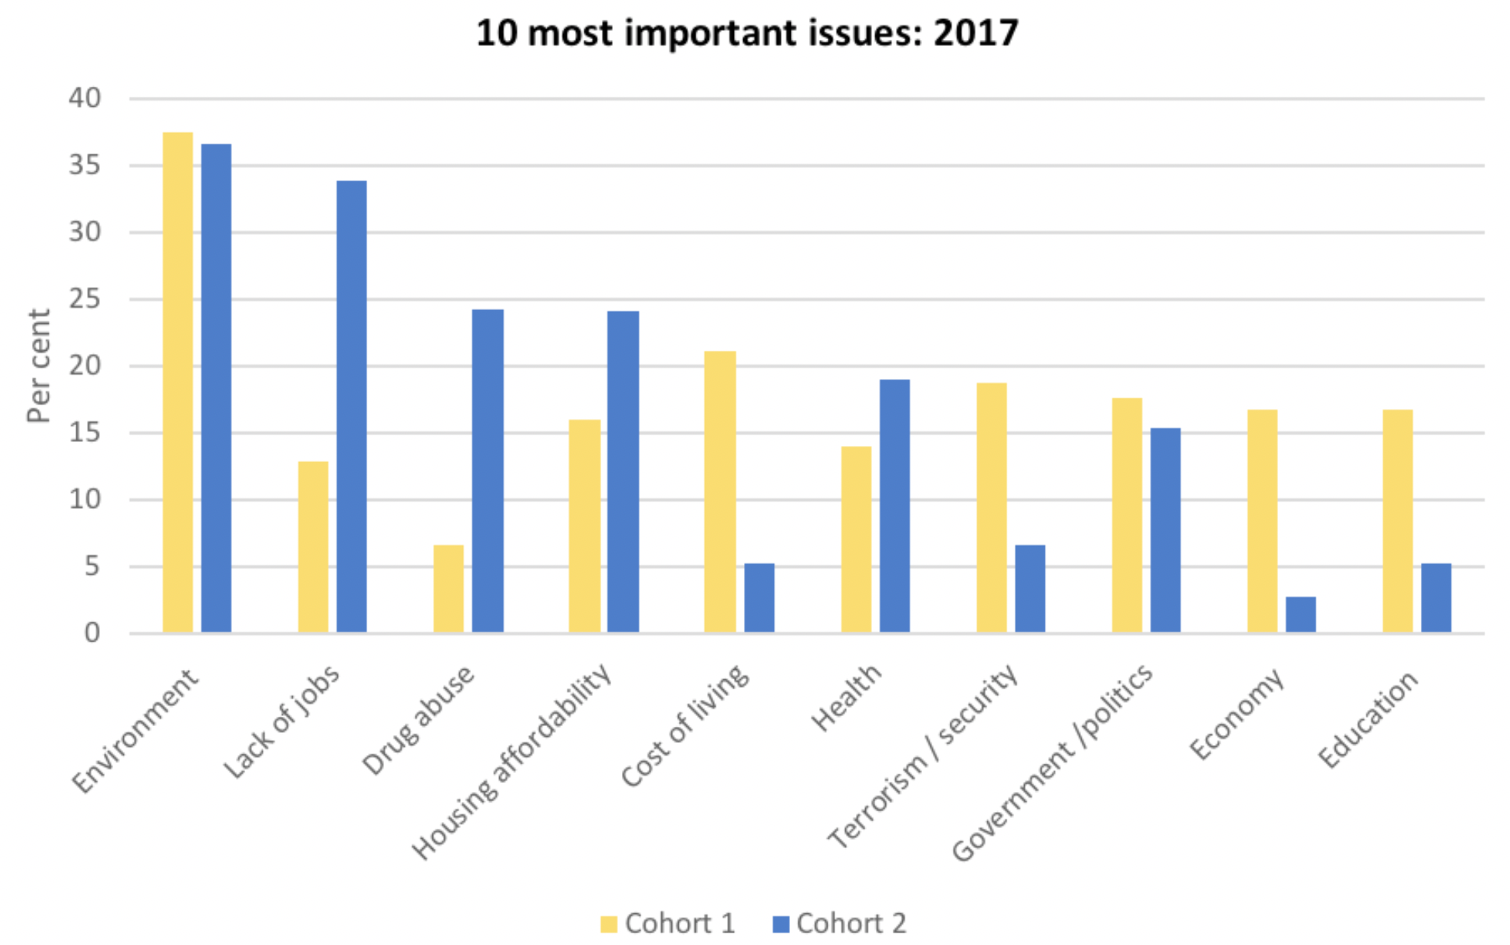 Graph: Top 10 most important issues for Cohort 1 and Cohort 2 (2017)